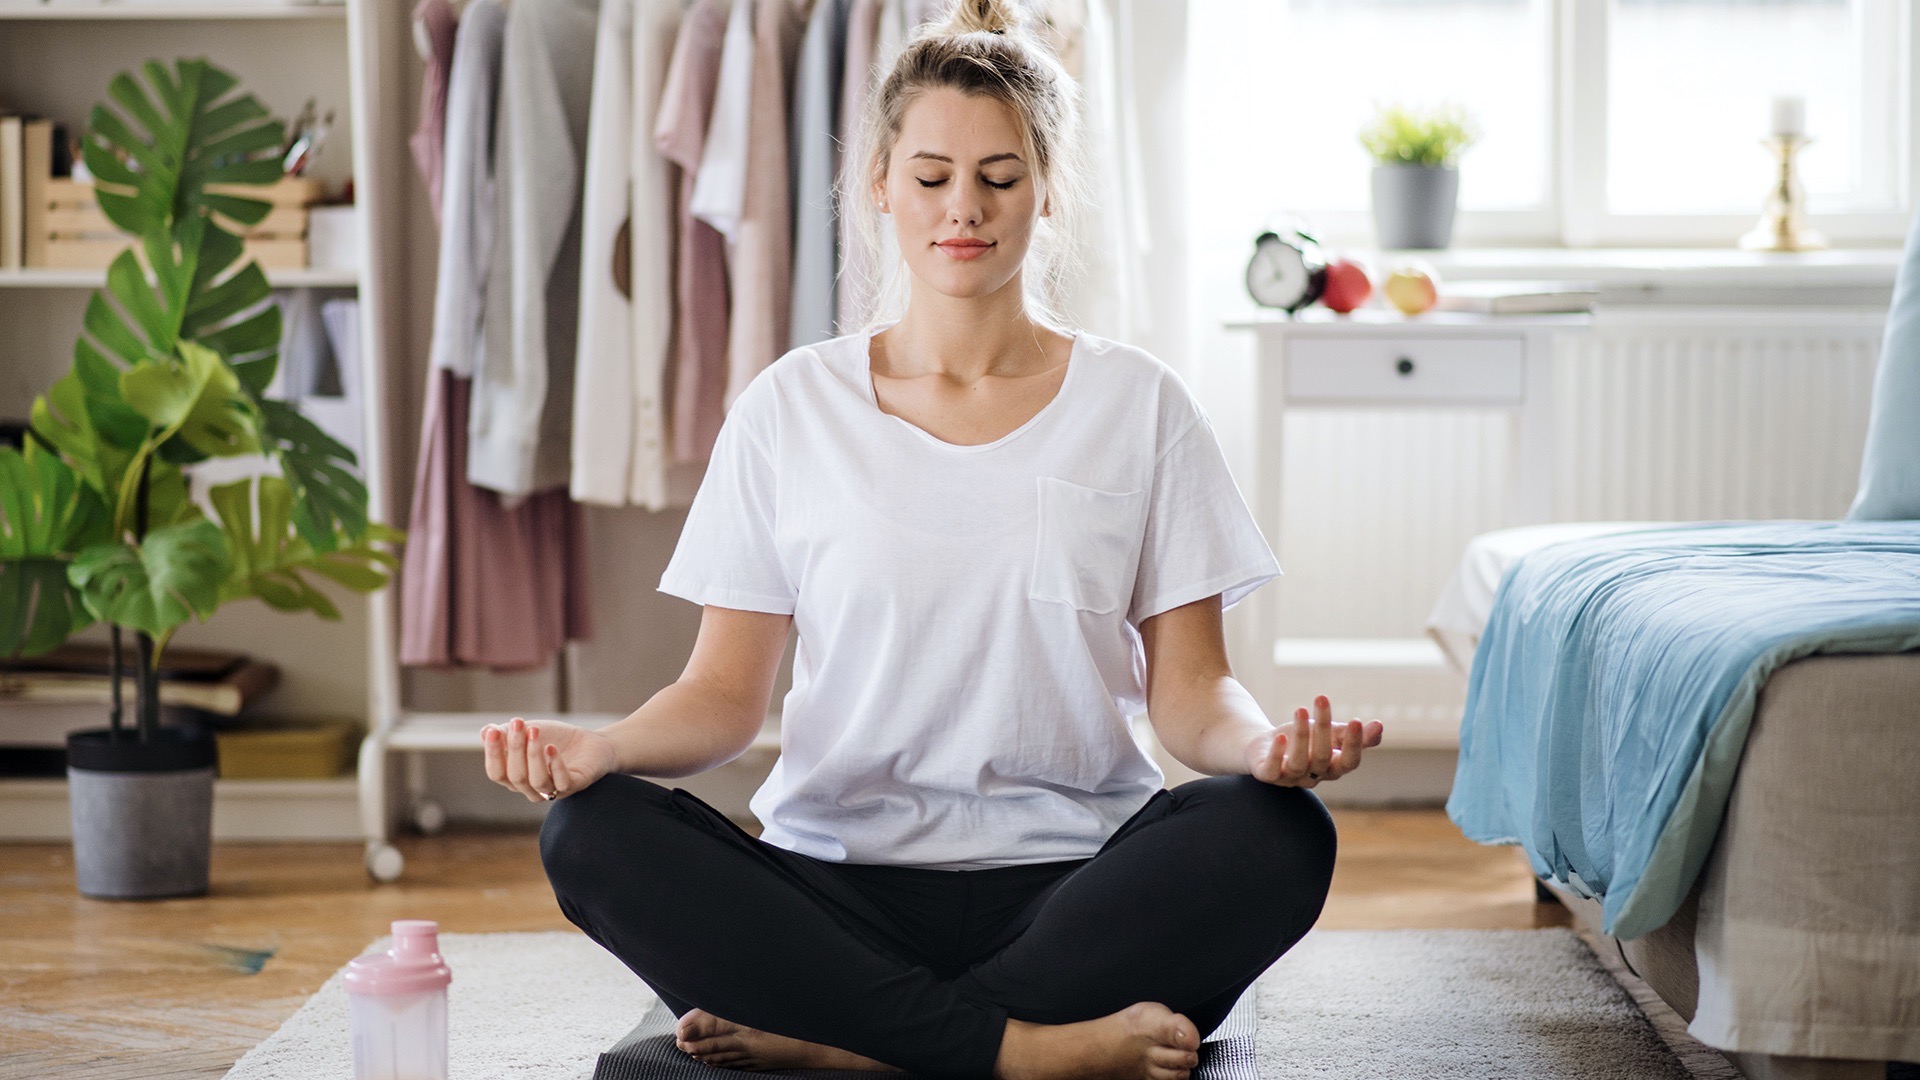 How to capture wellness, self-care, and mindfulness at home